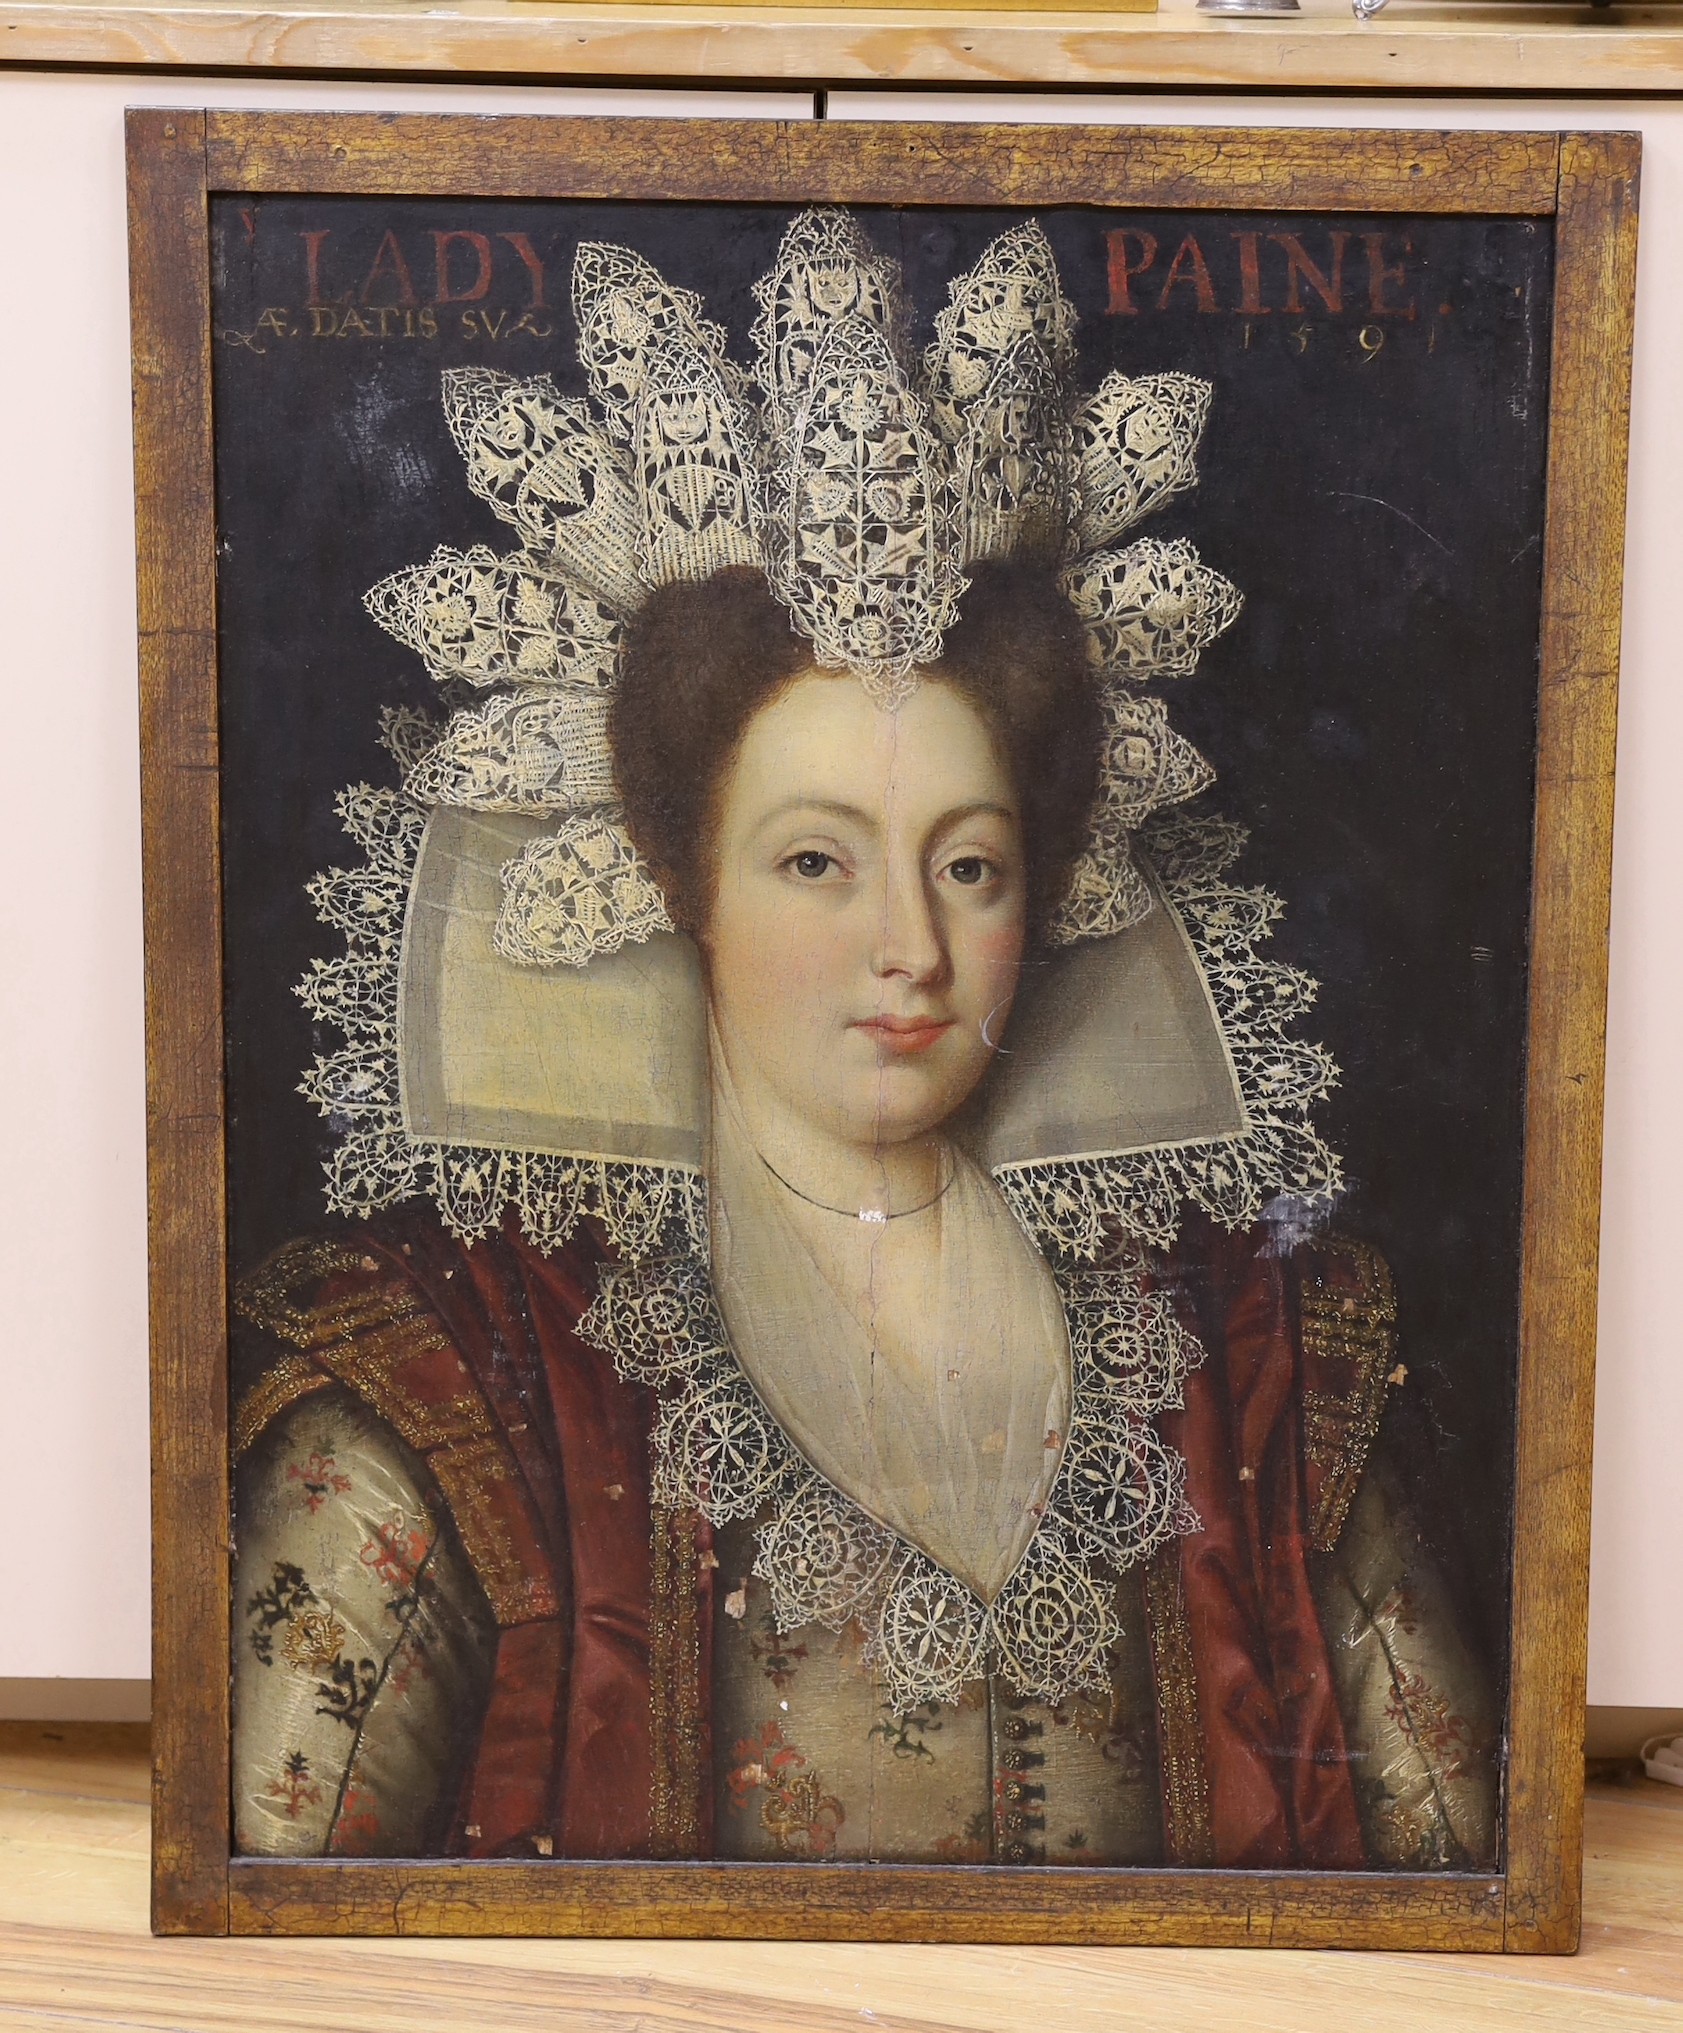 Early 19th century English School, oil on wooden panel, Portrait of 'Lady Paine, AE Datis Sua 1591', 65 x 50cm